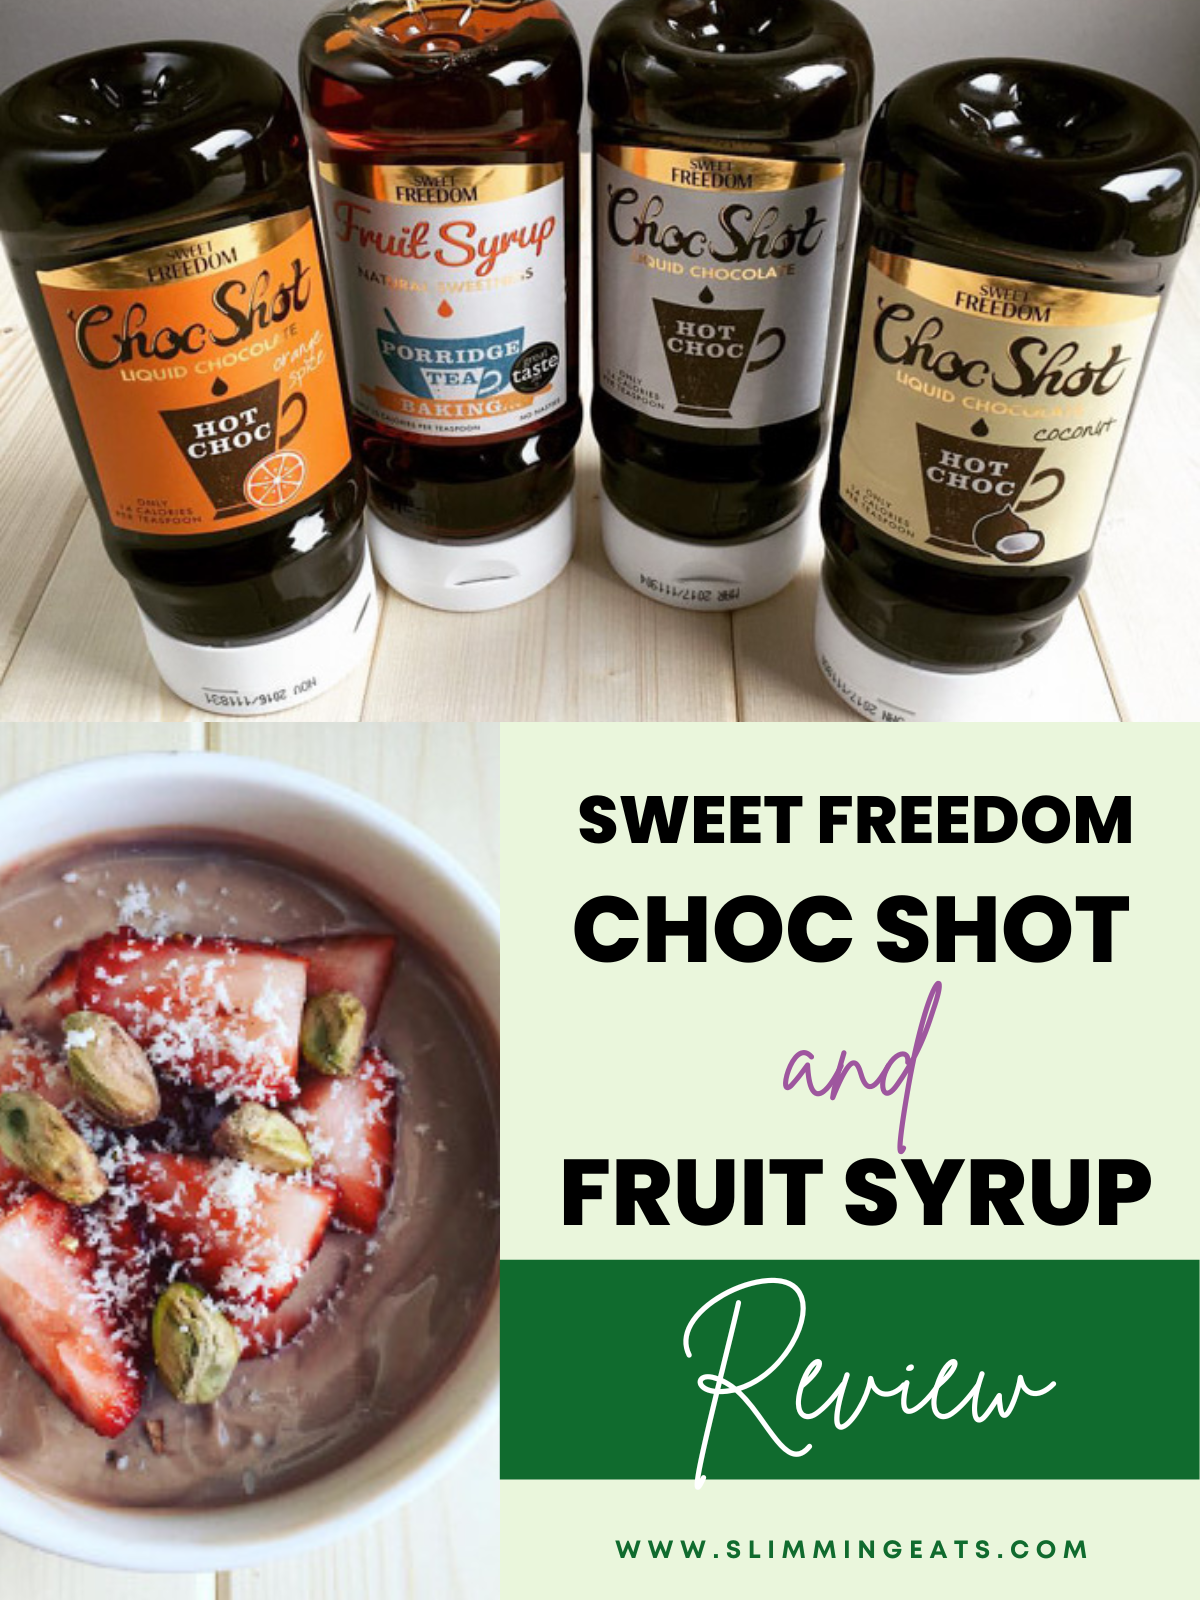 Sweet Freedom Choc Shot and Fruit Syrup Review image